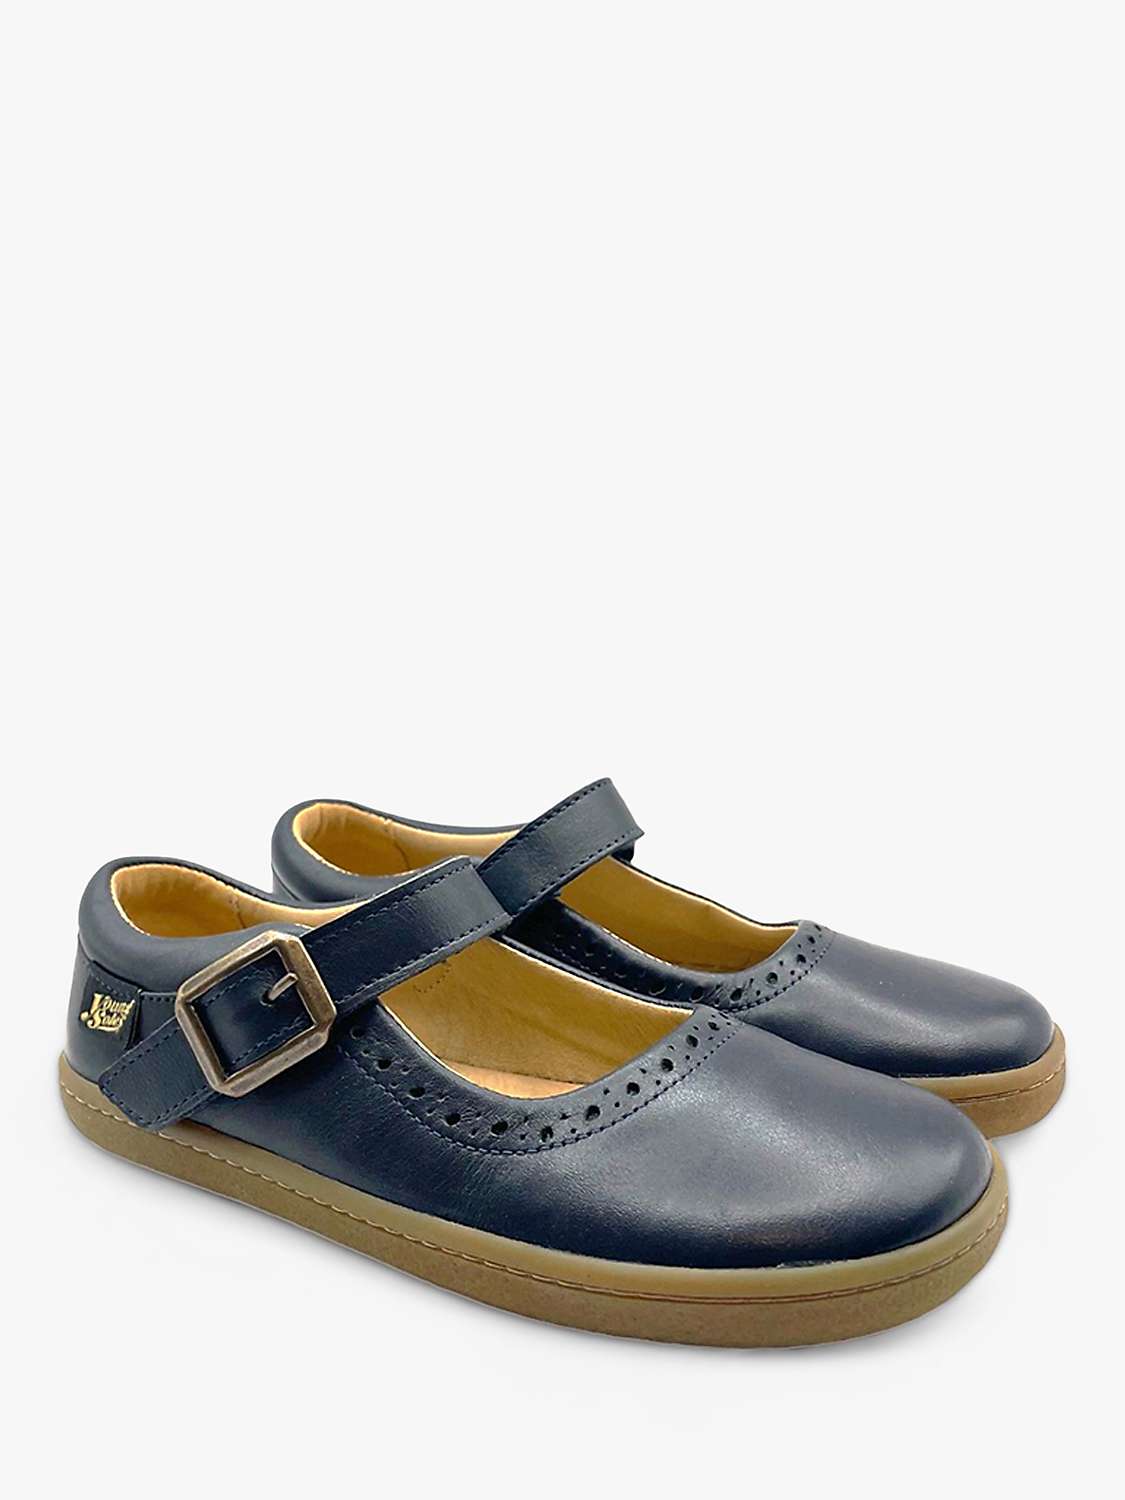 Buy Young Soles Kids' Holly Mary Jane Shoes Online at johnlewis.com